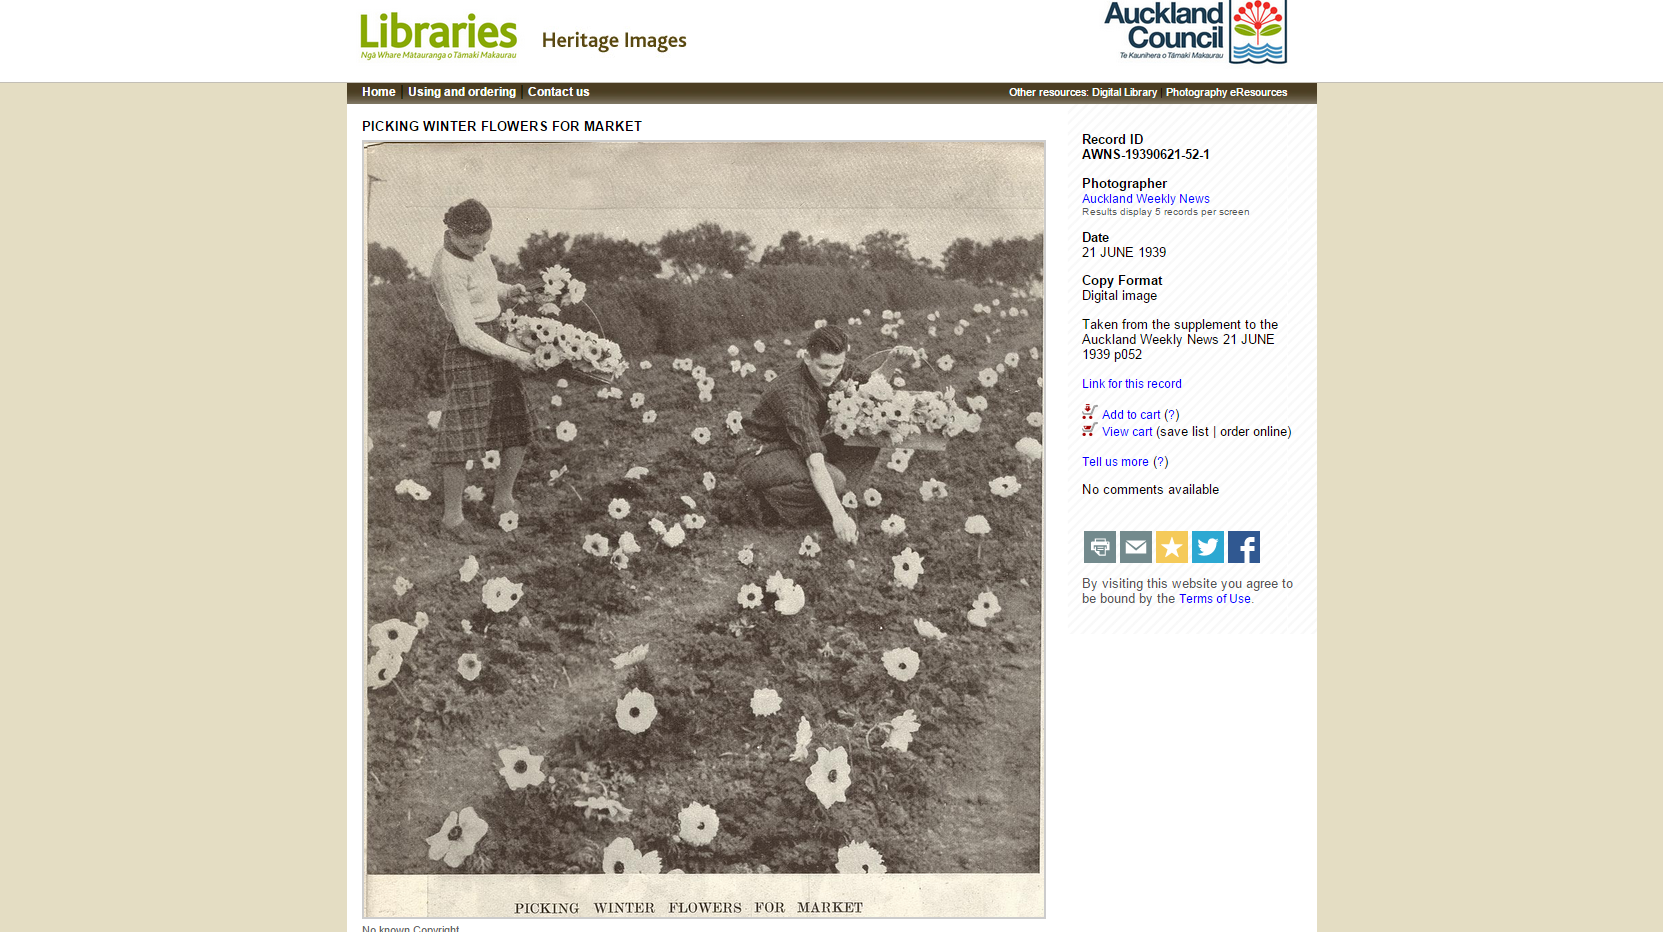 Screenshot of a photo of two a woman and a man picking flowers from a field, and descriptive metadata about the image